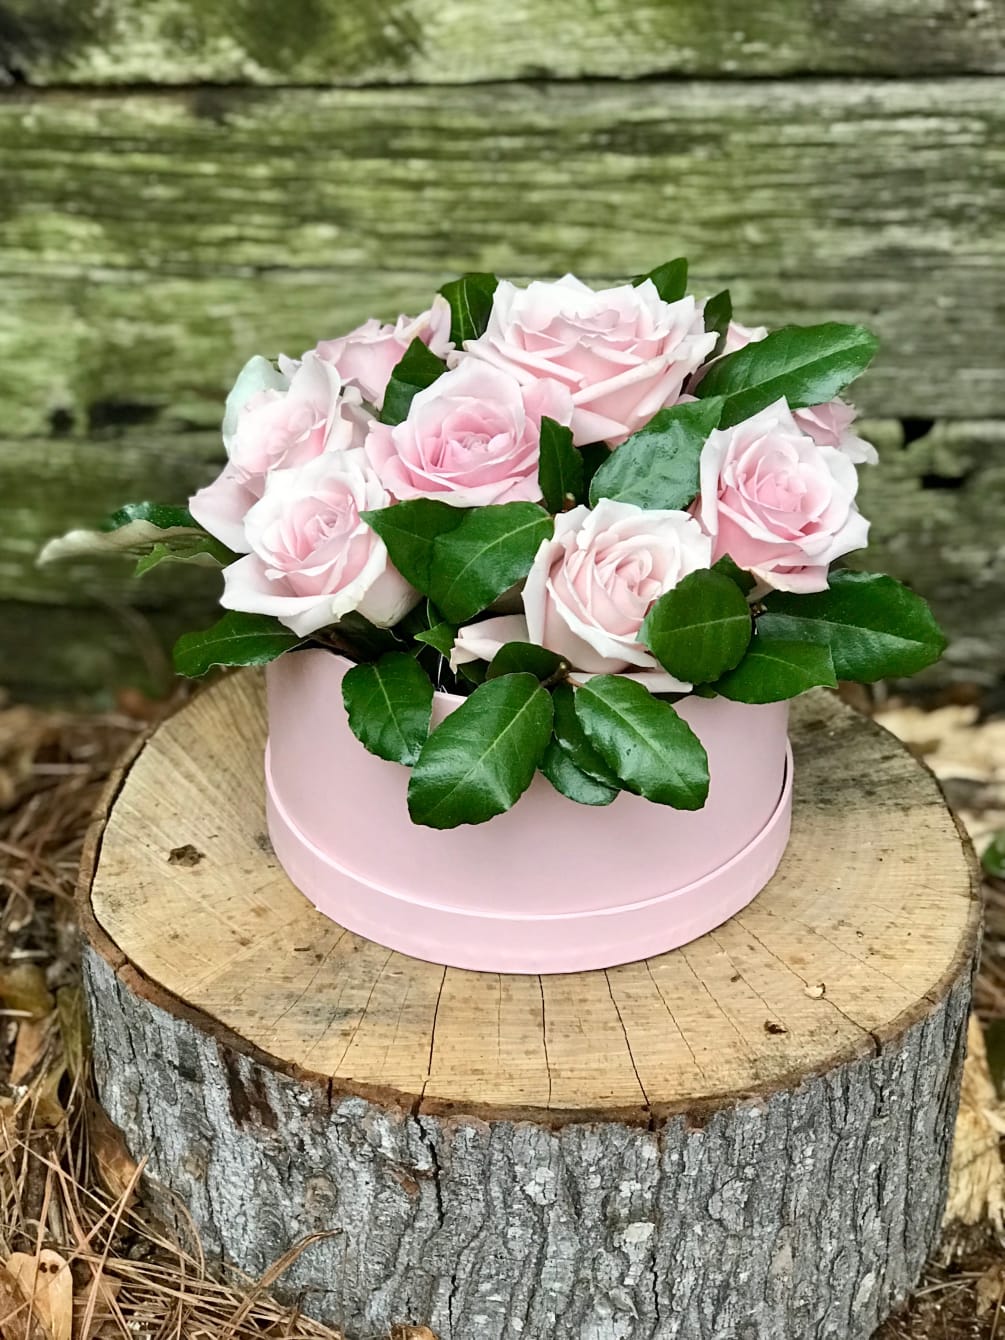 Keepsake Hatbox filled with roses, 8, 12, or 18.  You choose